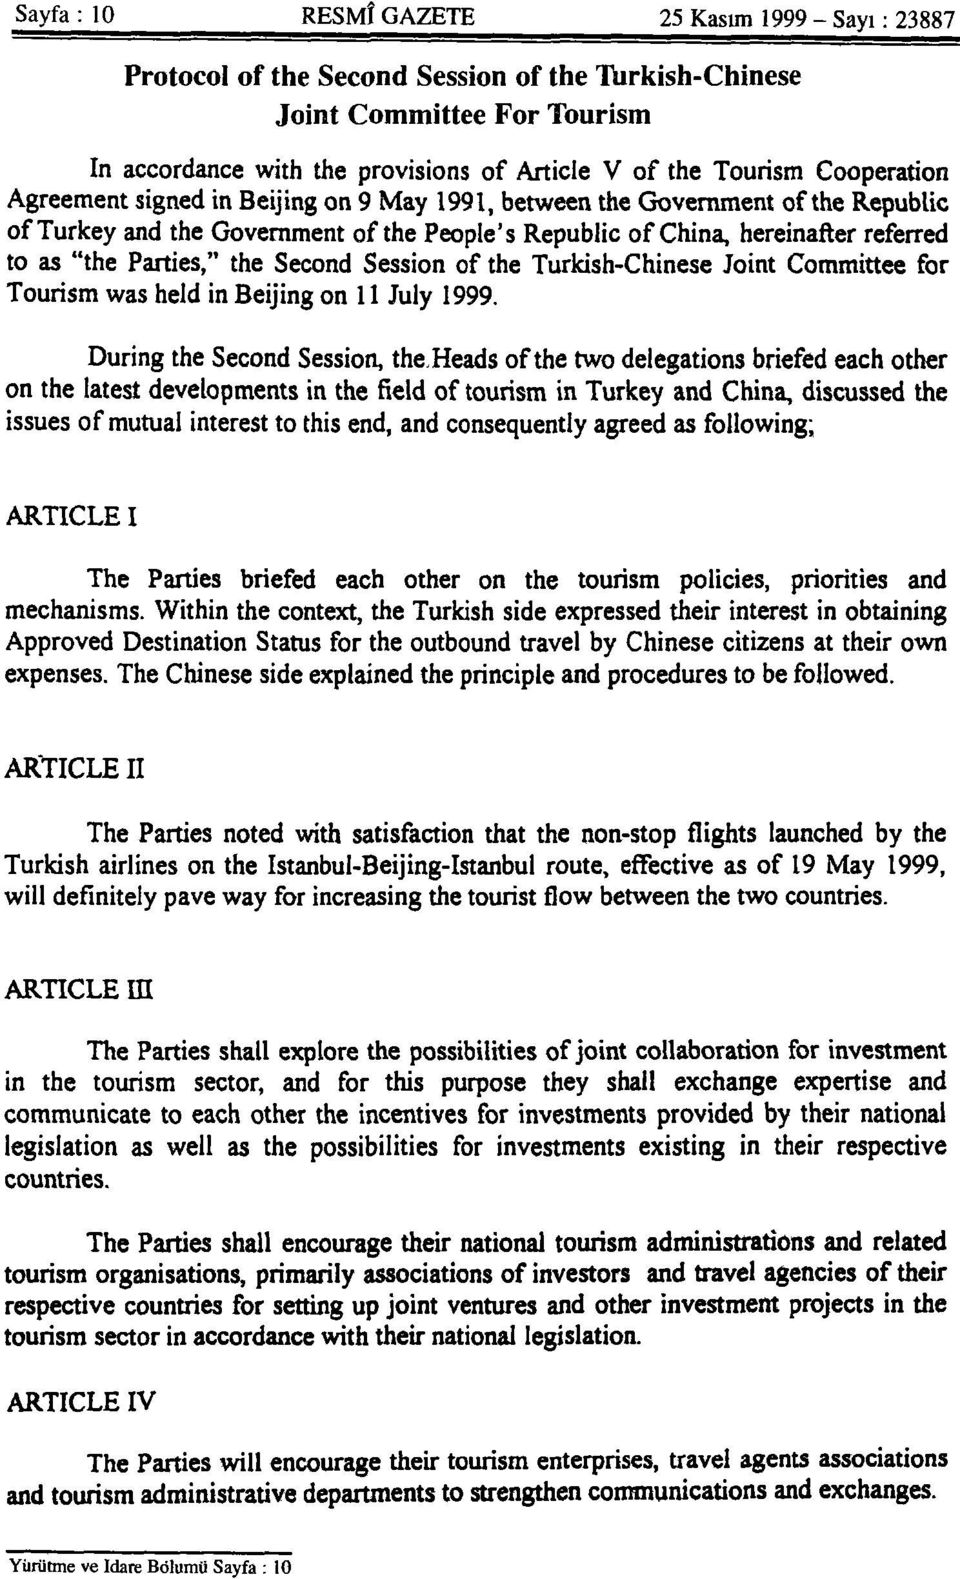 the Second Session of the Turkish-Chinese Joint Committee for Tourism was held in Beijing on 11 July 1999.